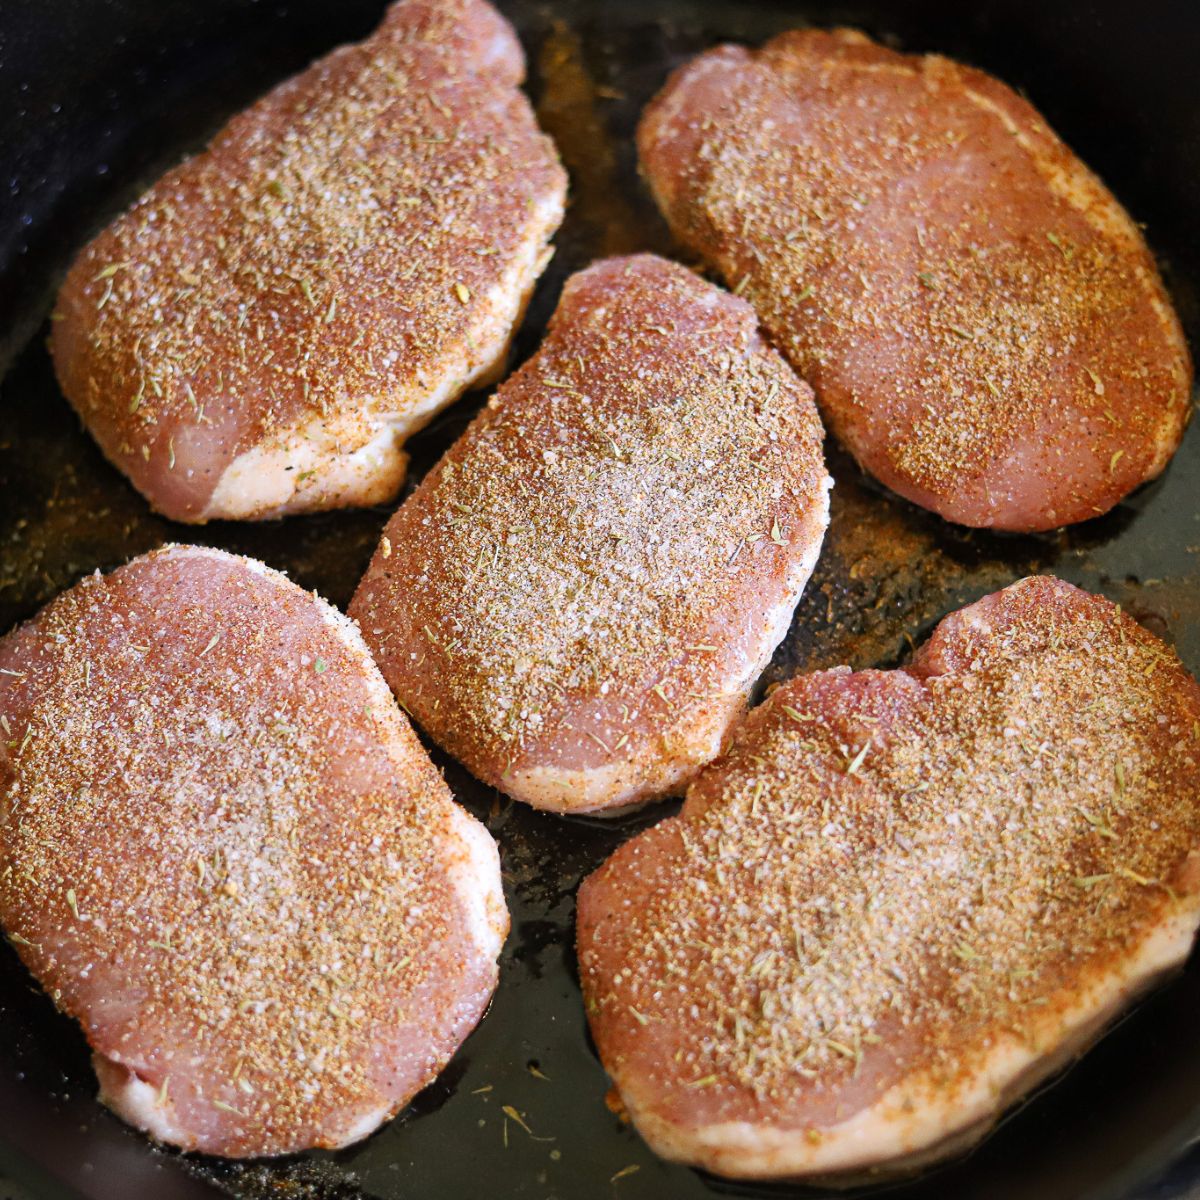 pork chops coated in seasoning cooking in a cast iron skillet.